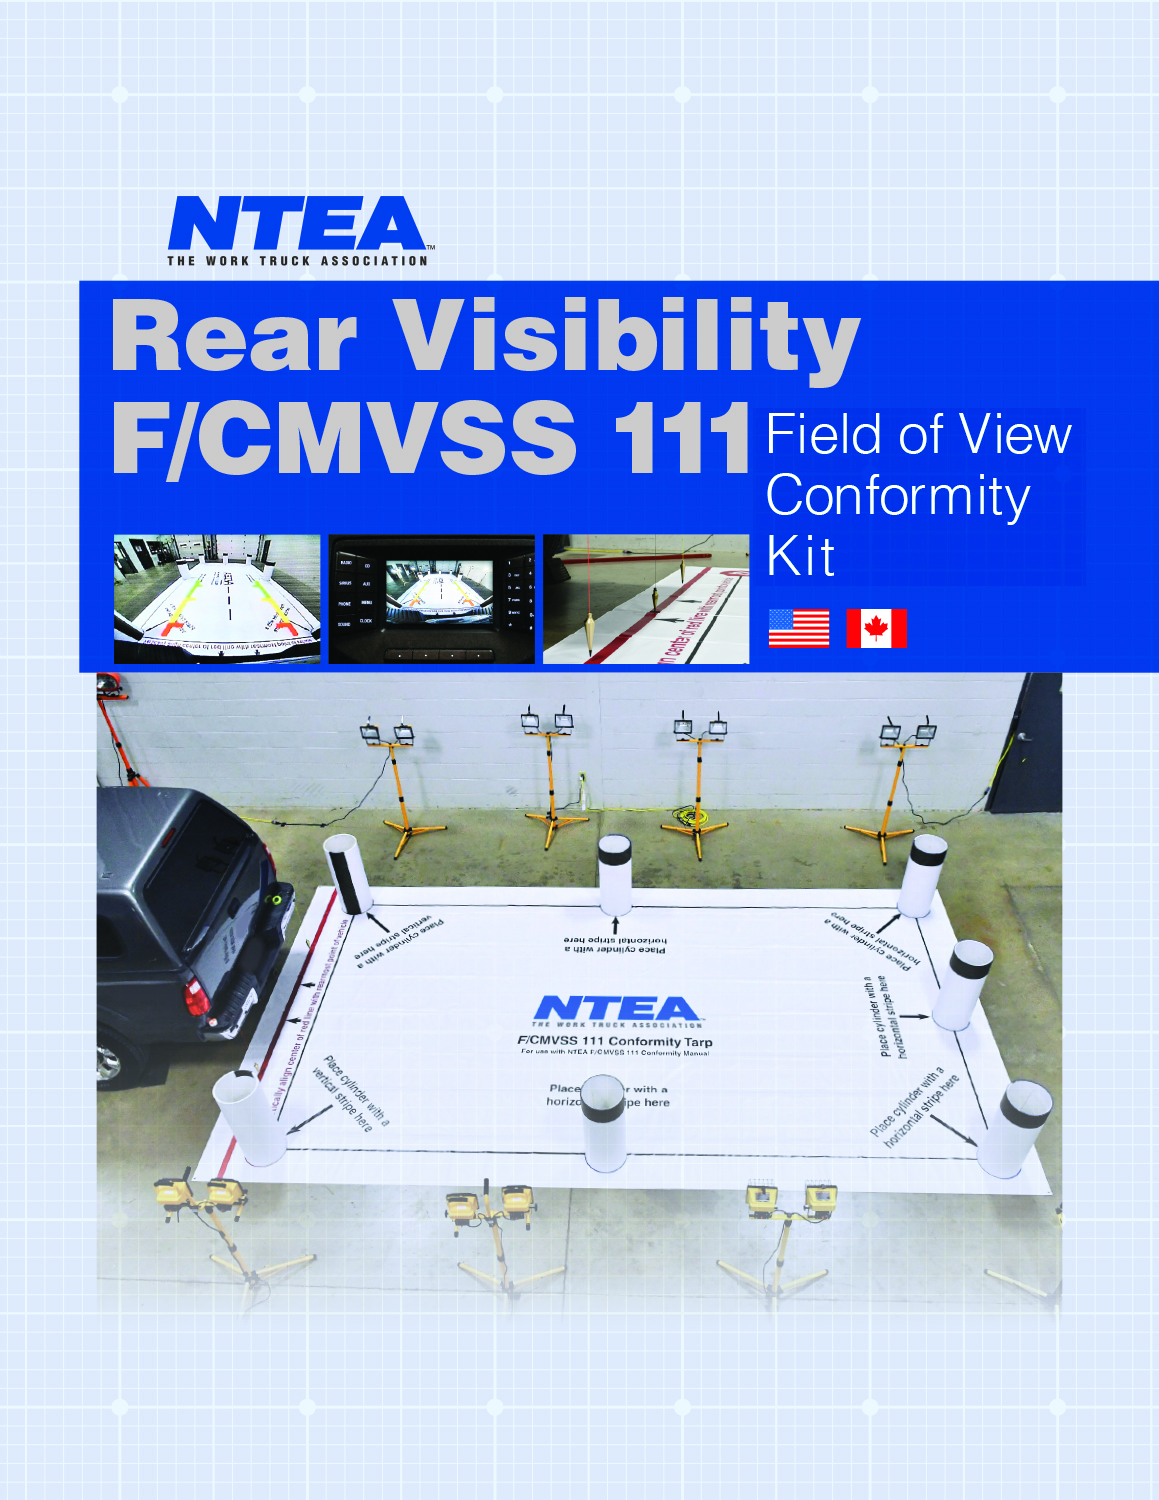 Rear Visibility F/CMVSS 111 Field of View Conformity Kit